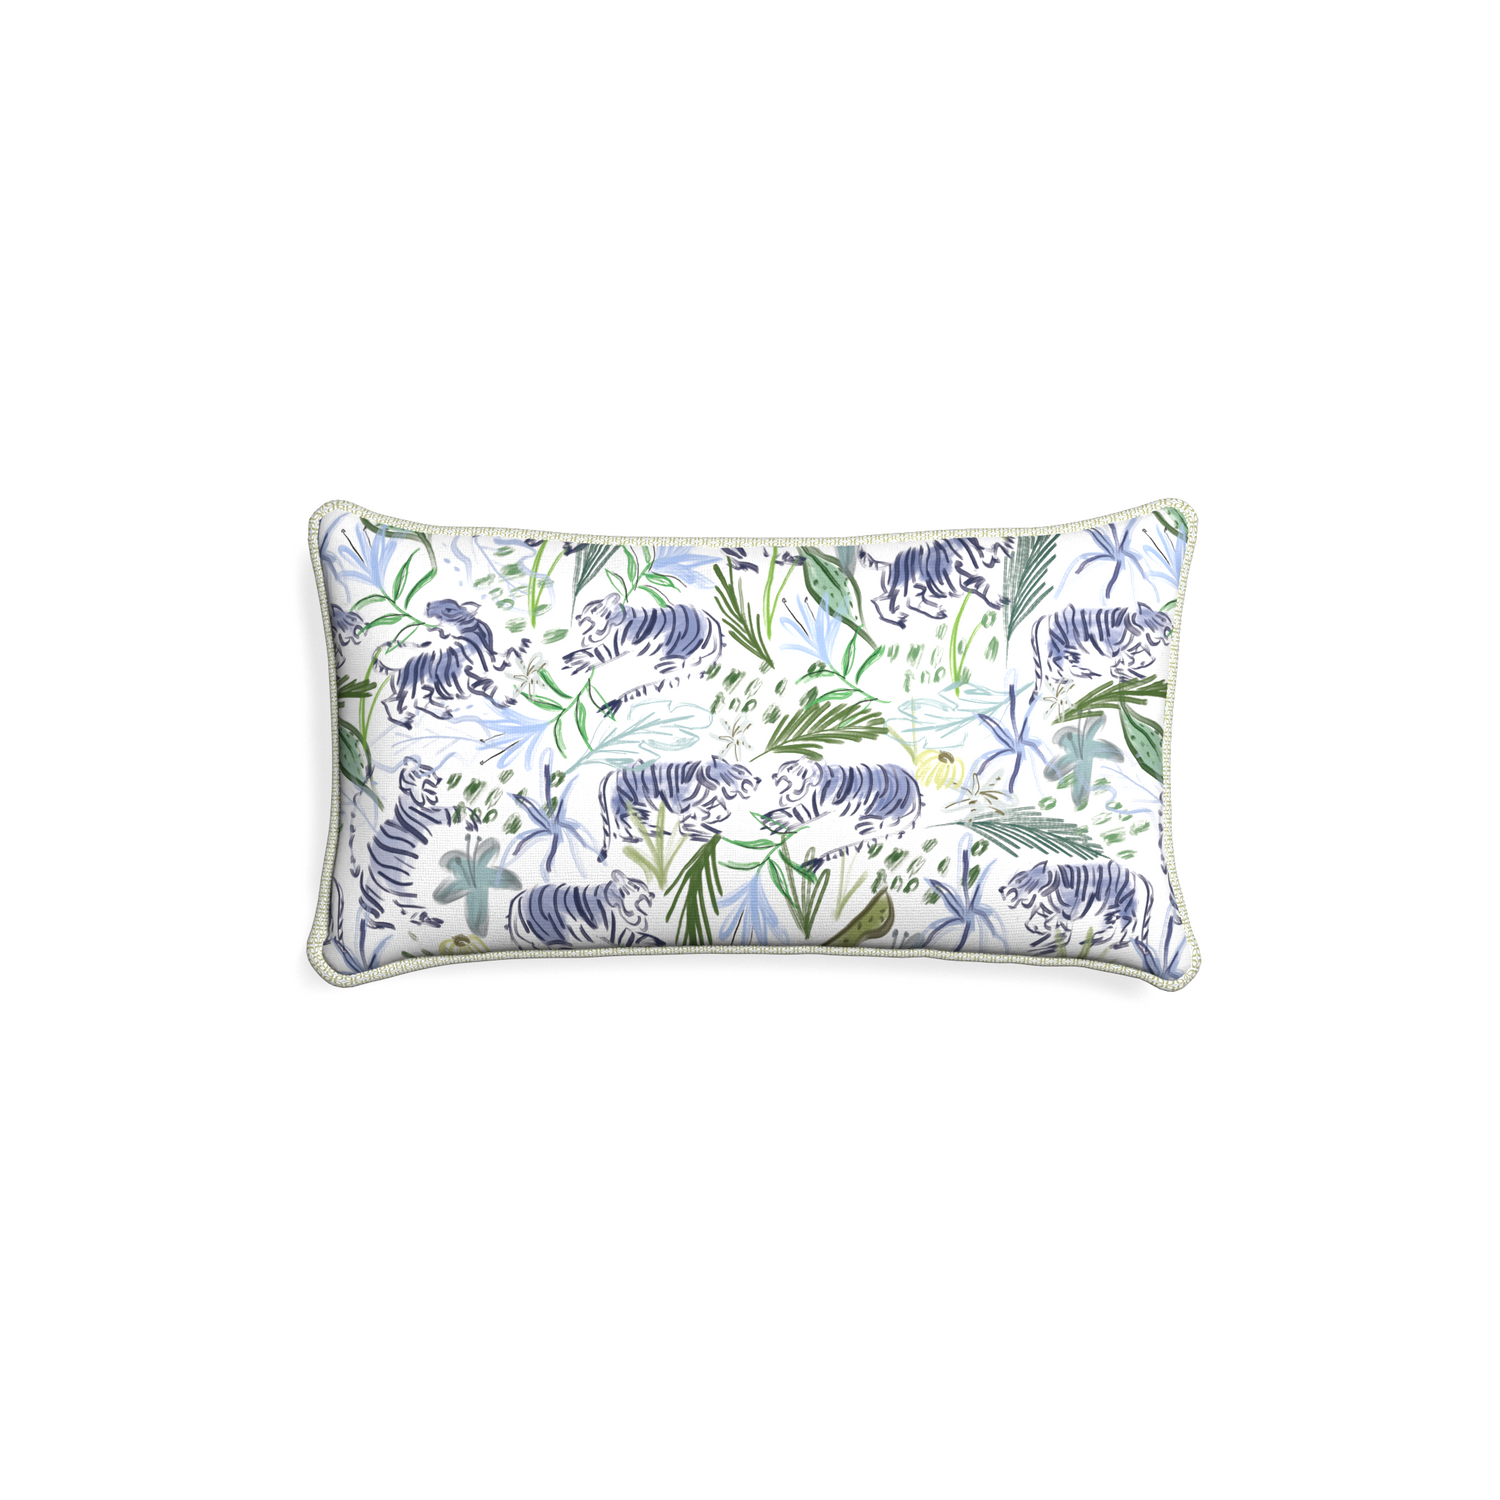 Petite-lumbar frida green custom green tigerpillow with l piping on white background